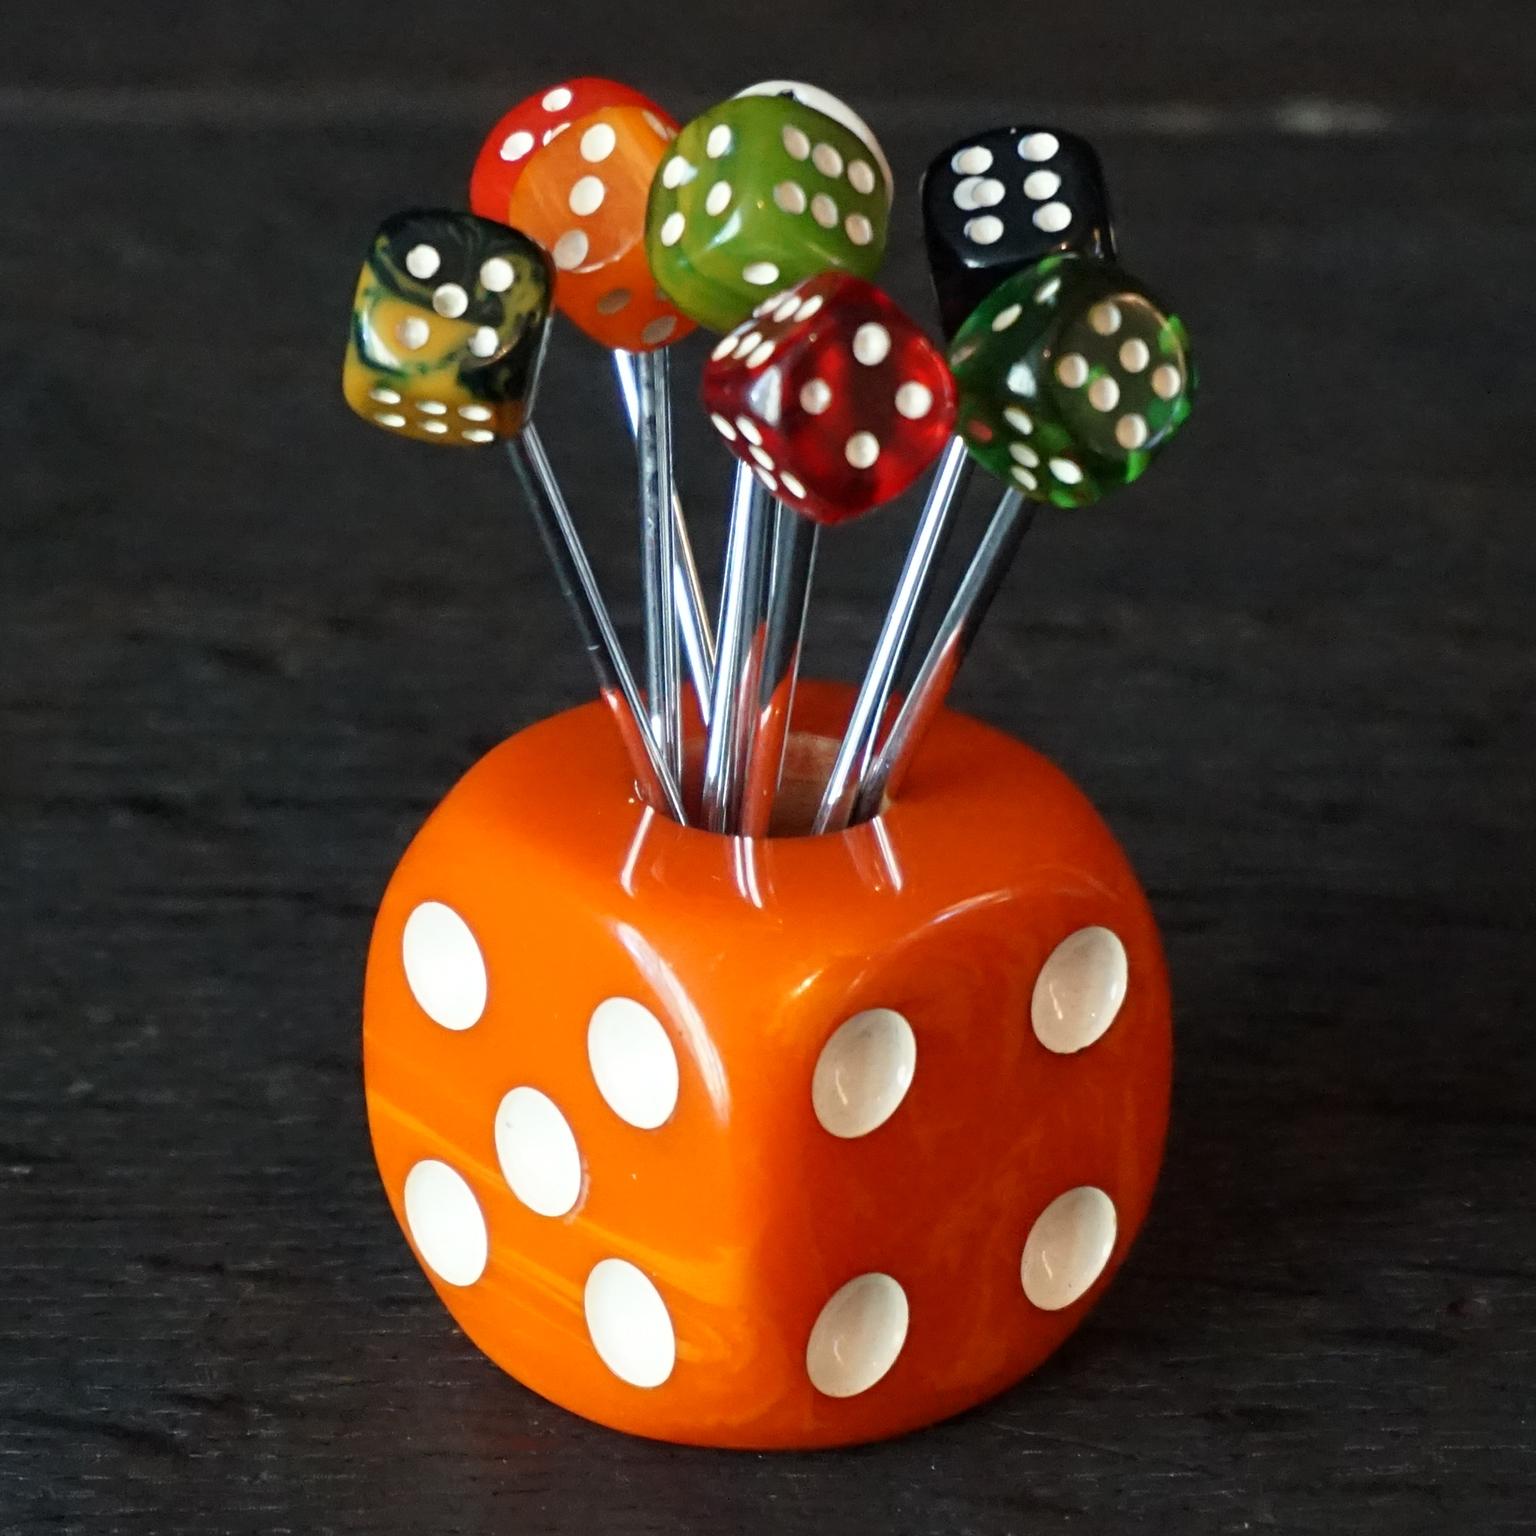 What a lovely collector's item this orange French 1930s Art Deco bakelite cocktail pick holder with 8 cocktail picks is.
Each pick has its own bakelite dice in a different colour, so it will be easy to remember which one is yours.

Eat your